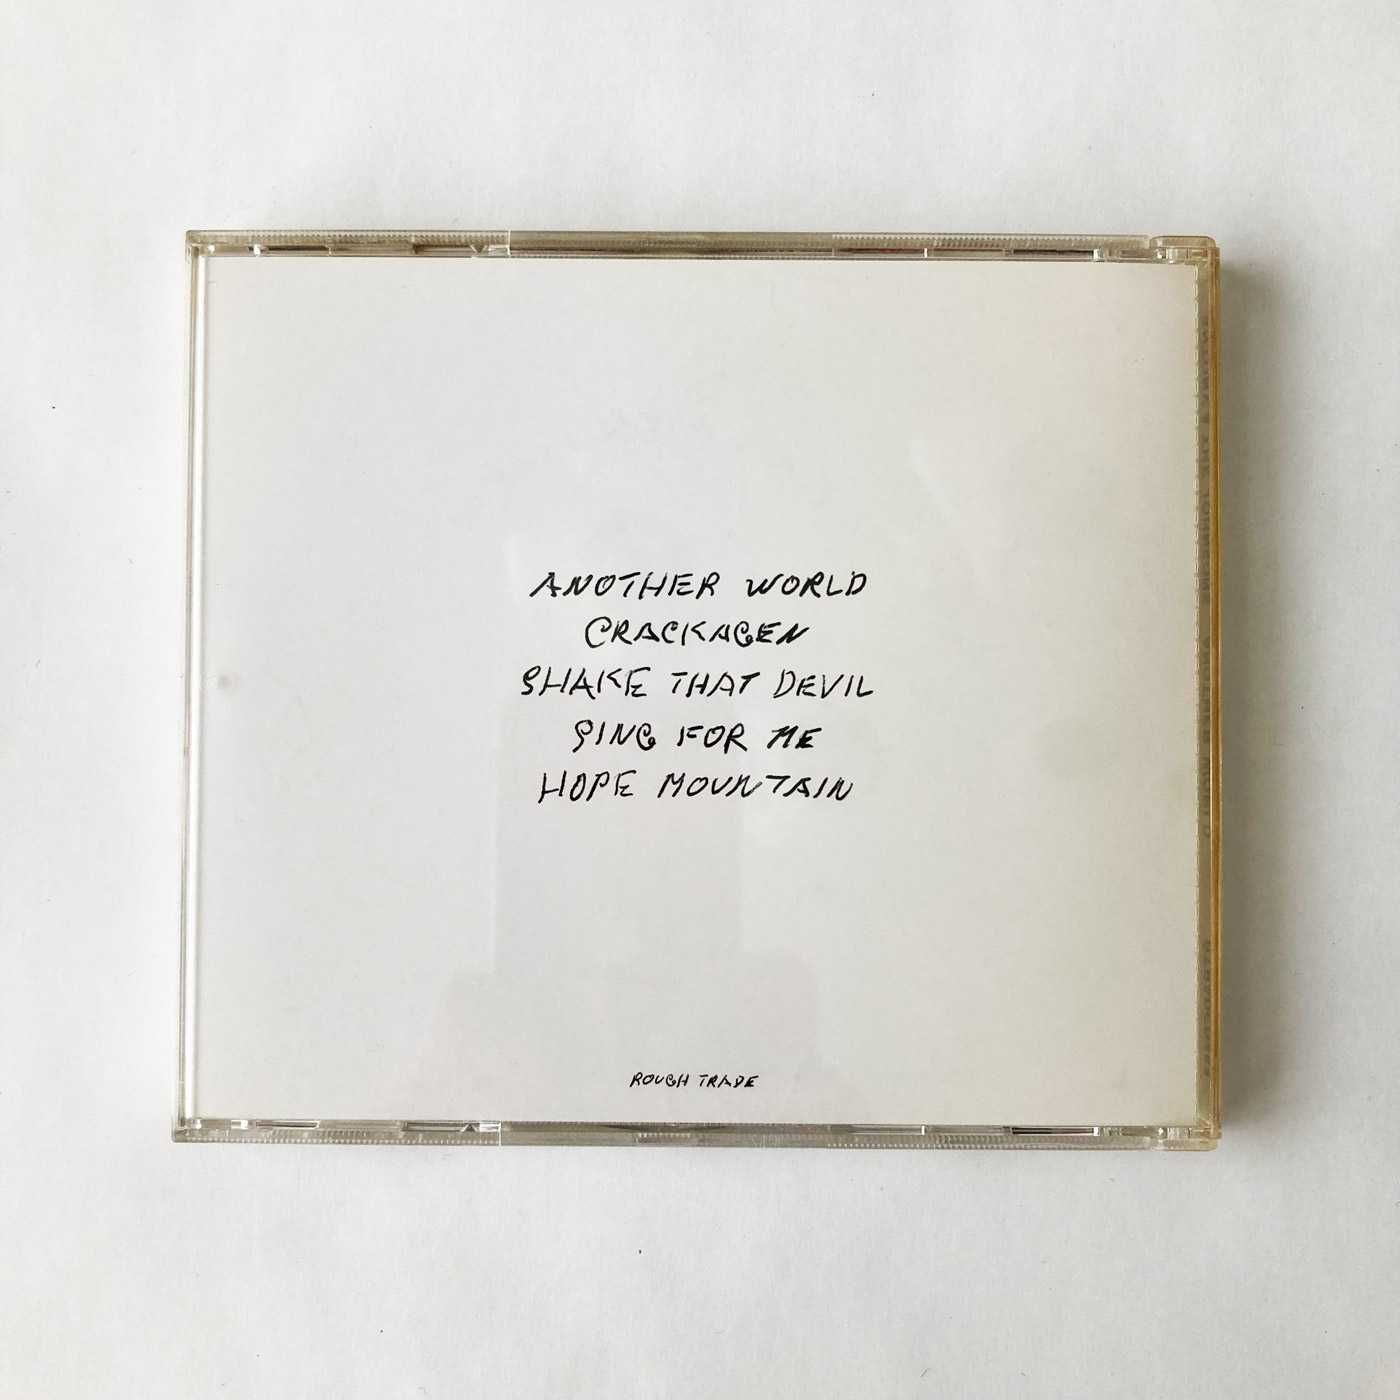 Antony and The Johnsons - Another world CD